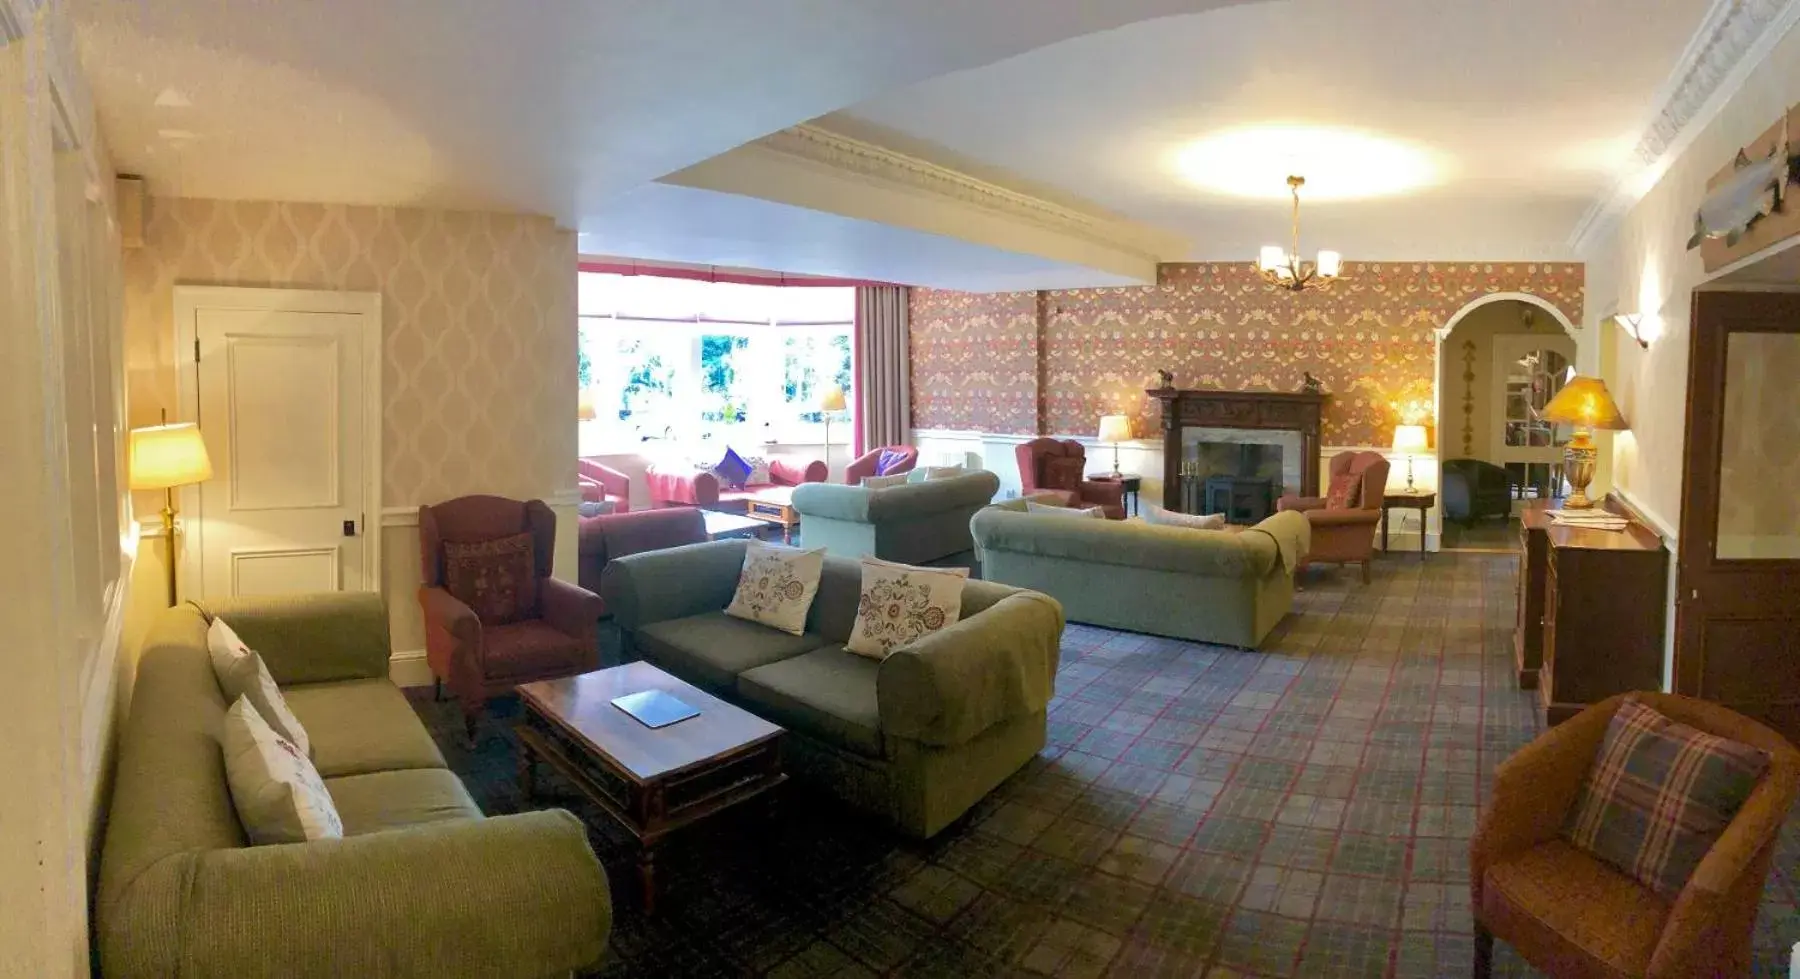 Lounge or bar, Seating Area in Dryburgh Abbey Hotel